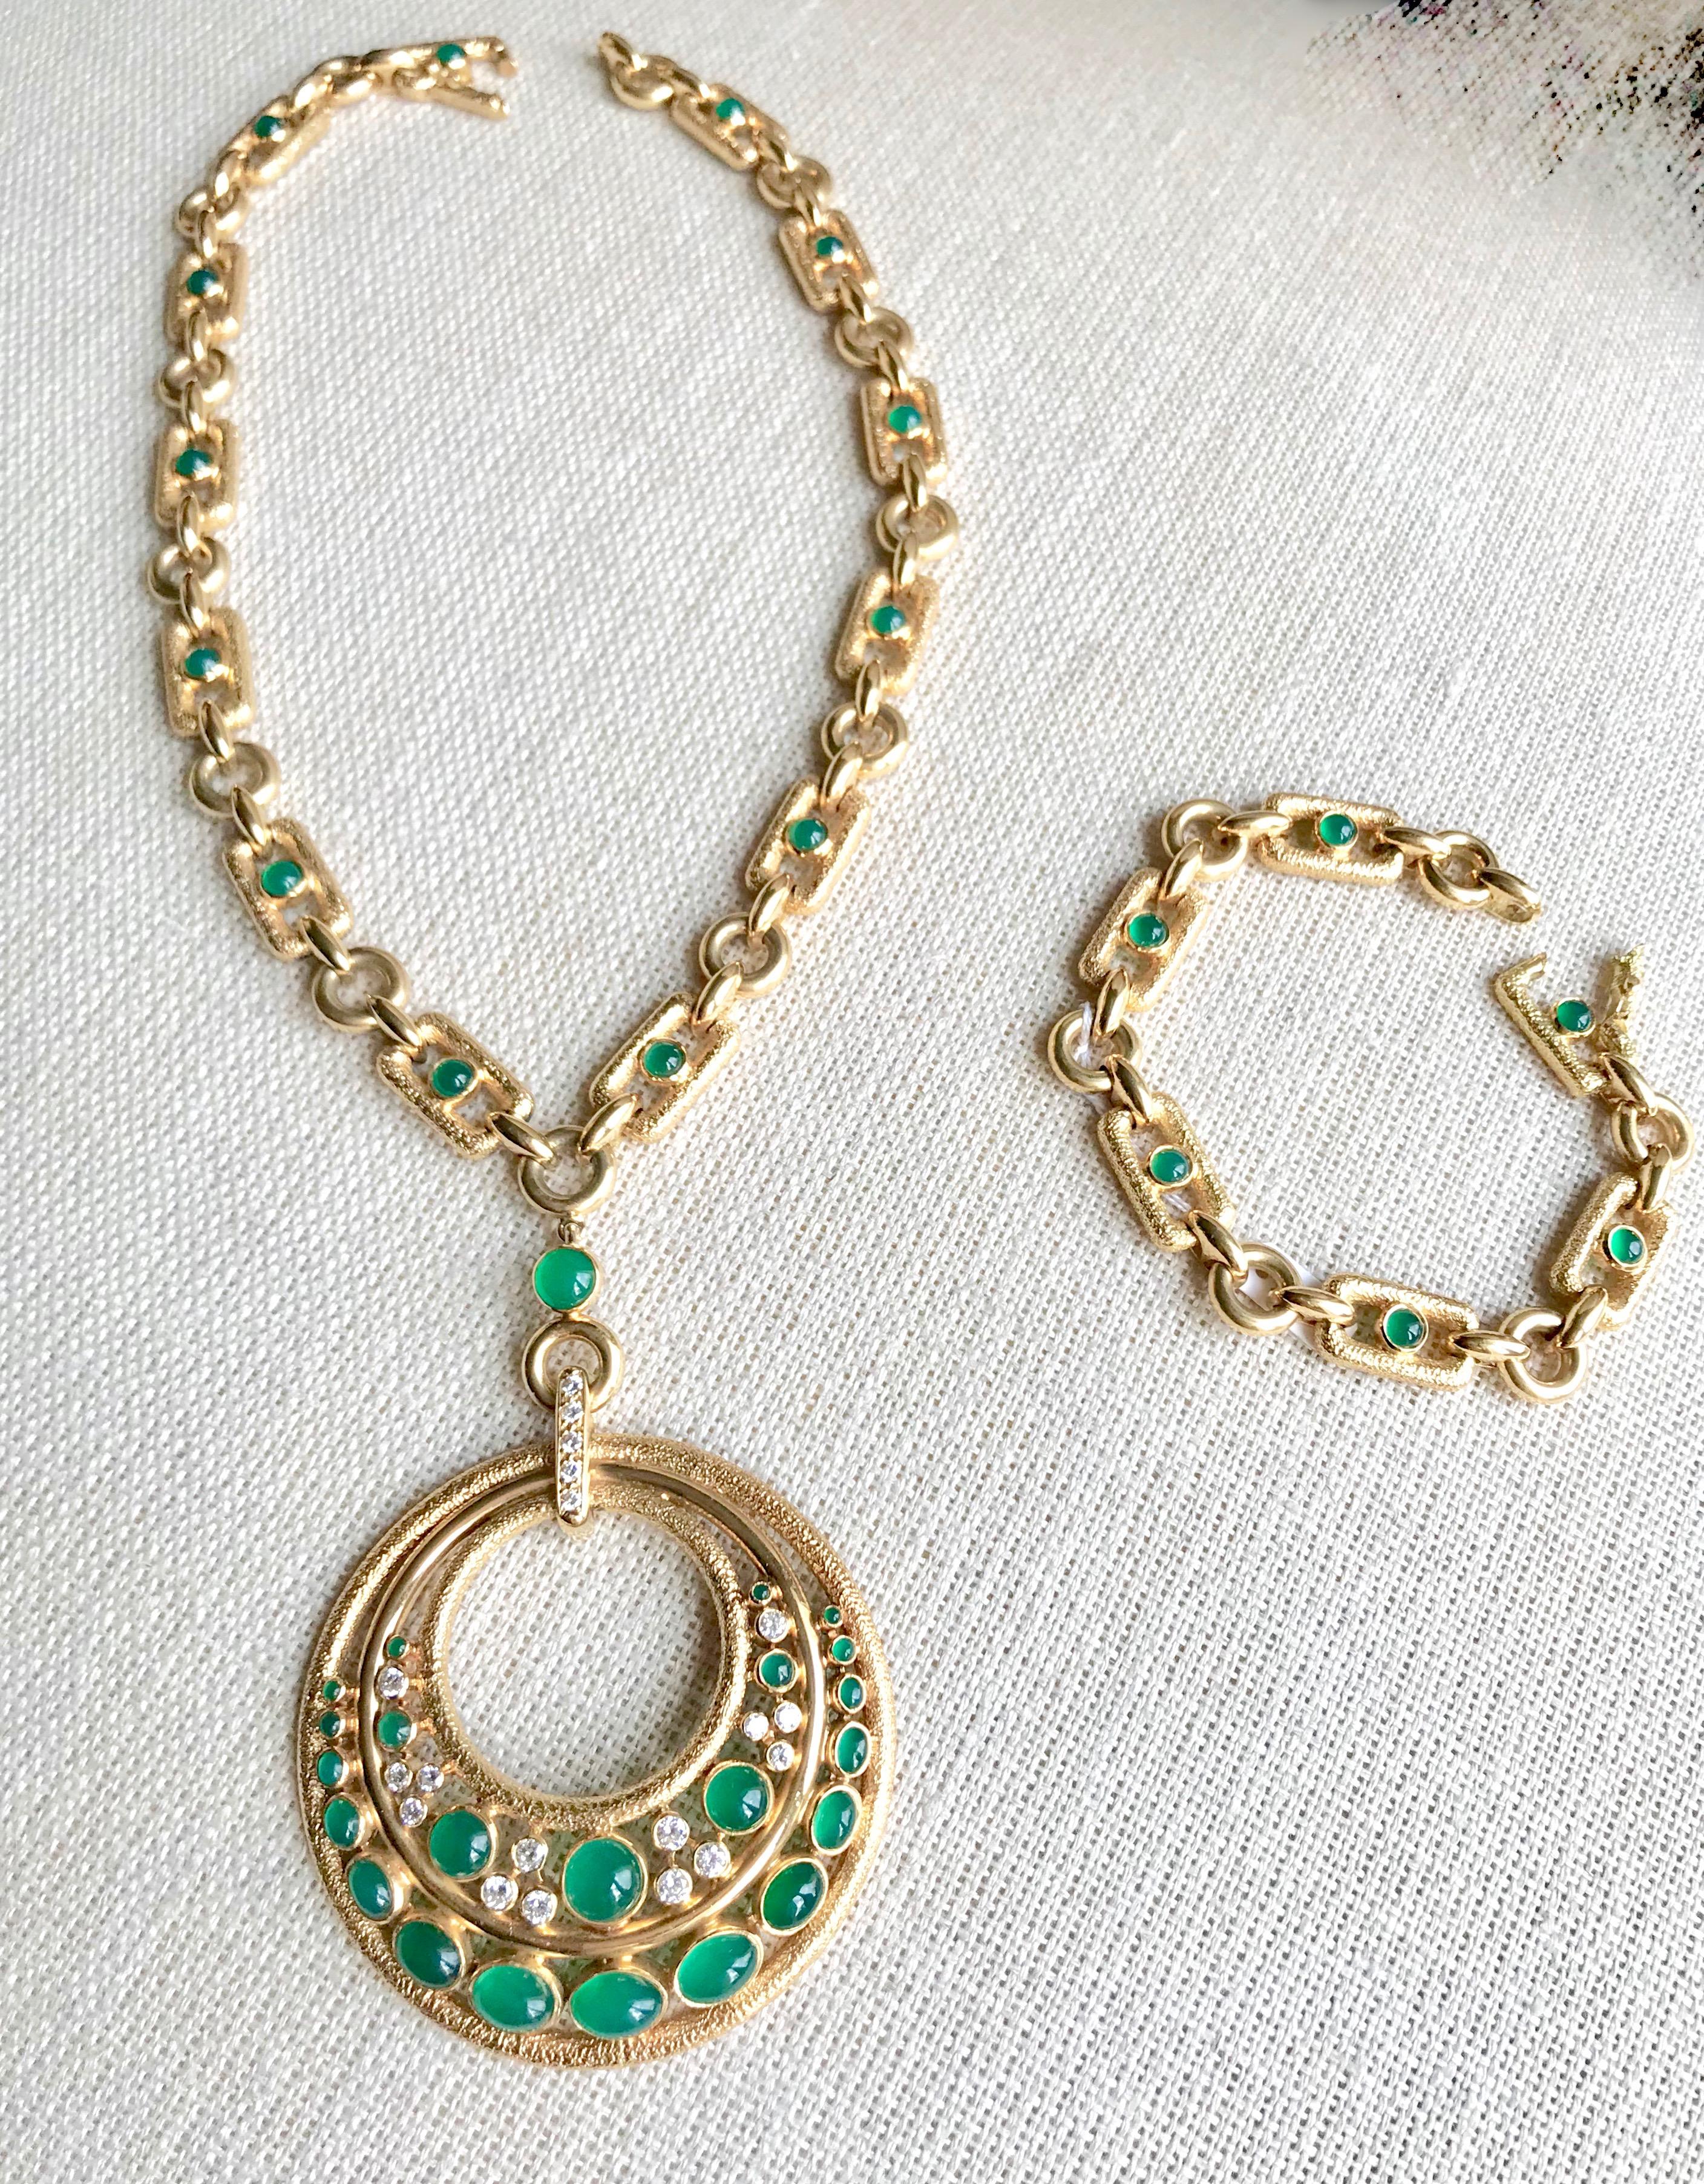 Mauboussin Necklace and Earrings Gold, Diamonds and Chrysoprase Transformable 7